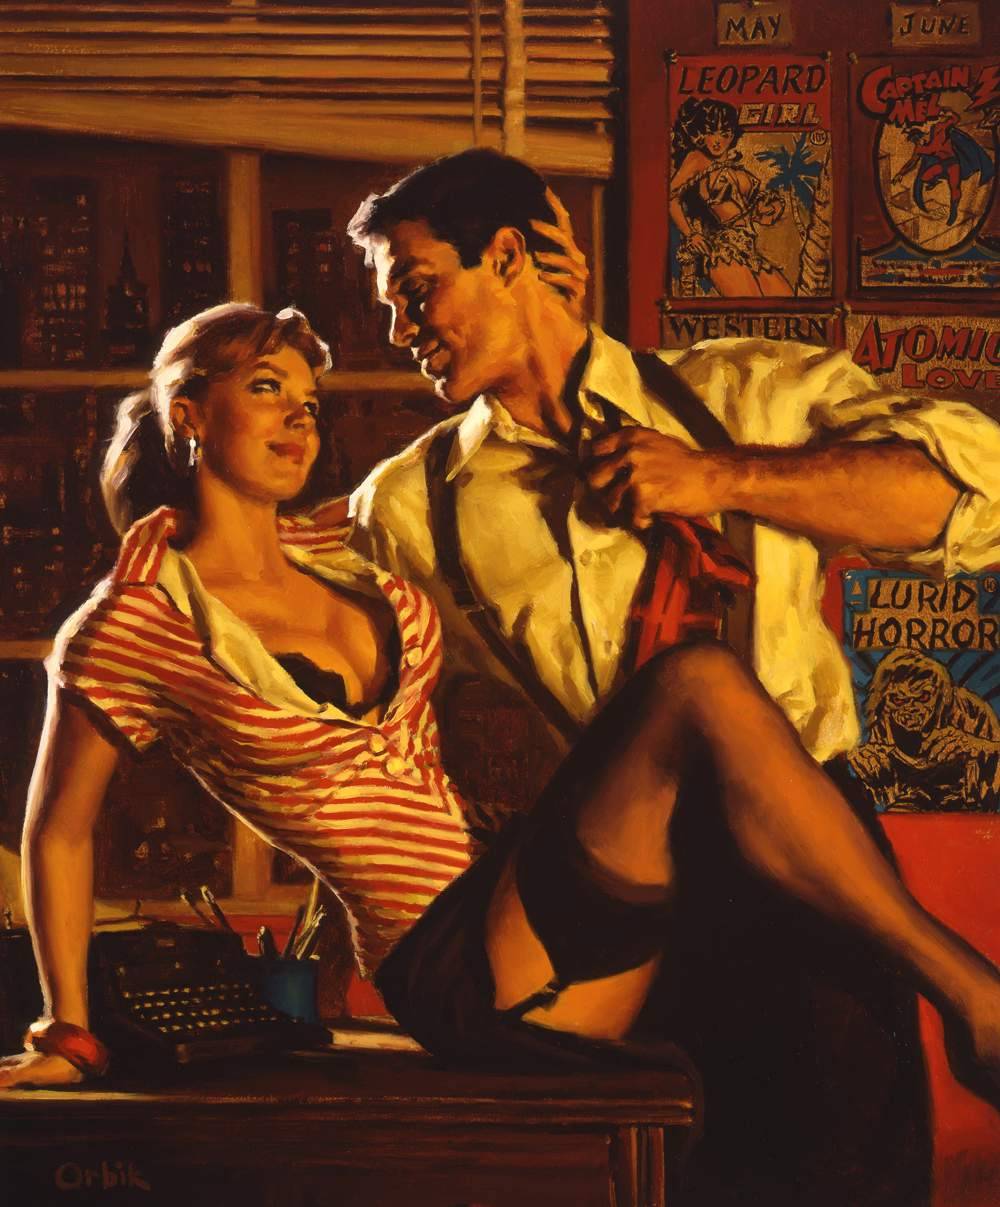 vintagegeekculture: Glen Orbik.  I wonder how many people have sexy affairs at comic